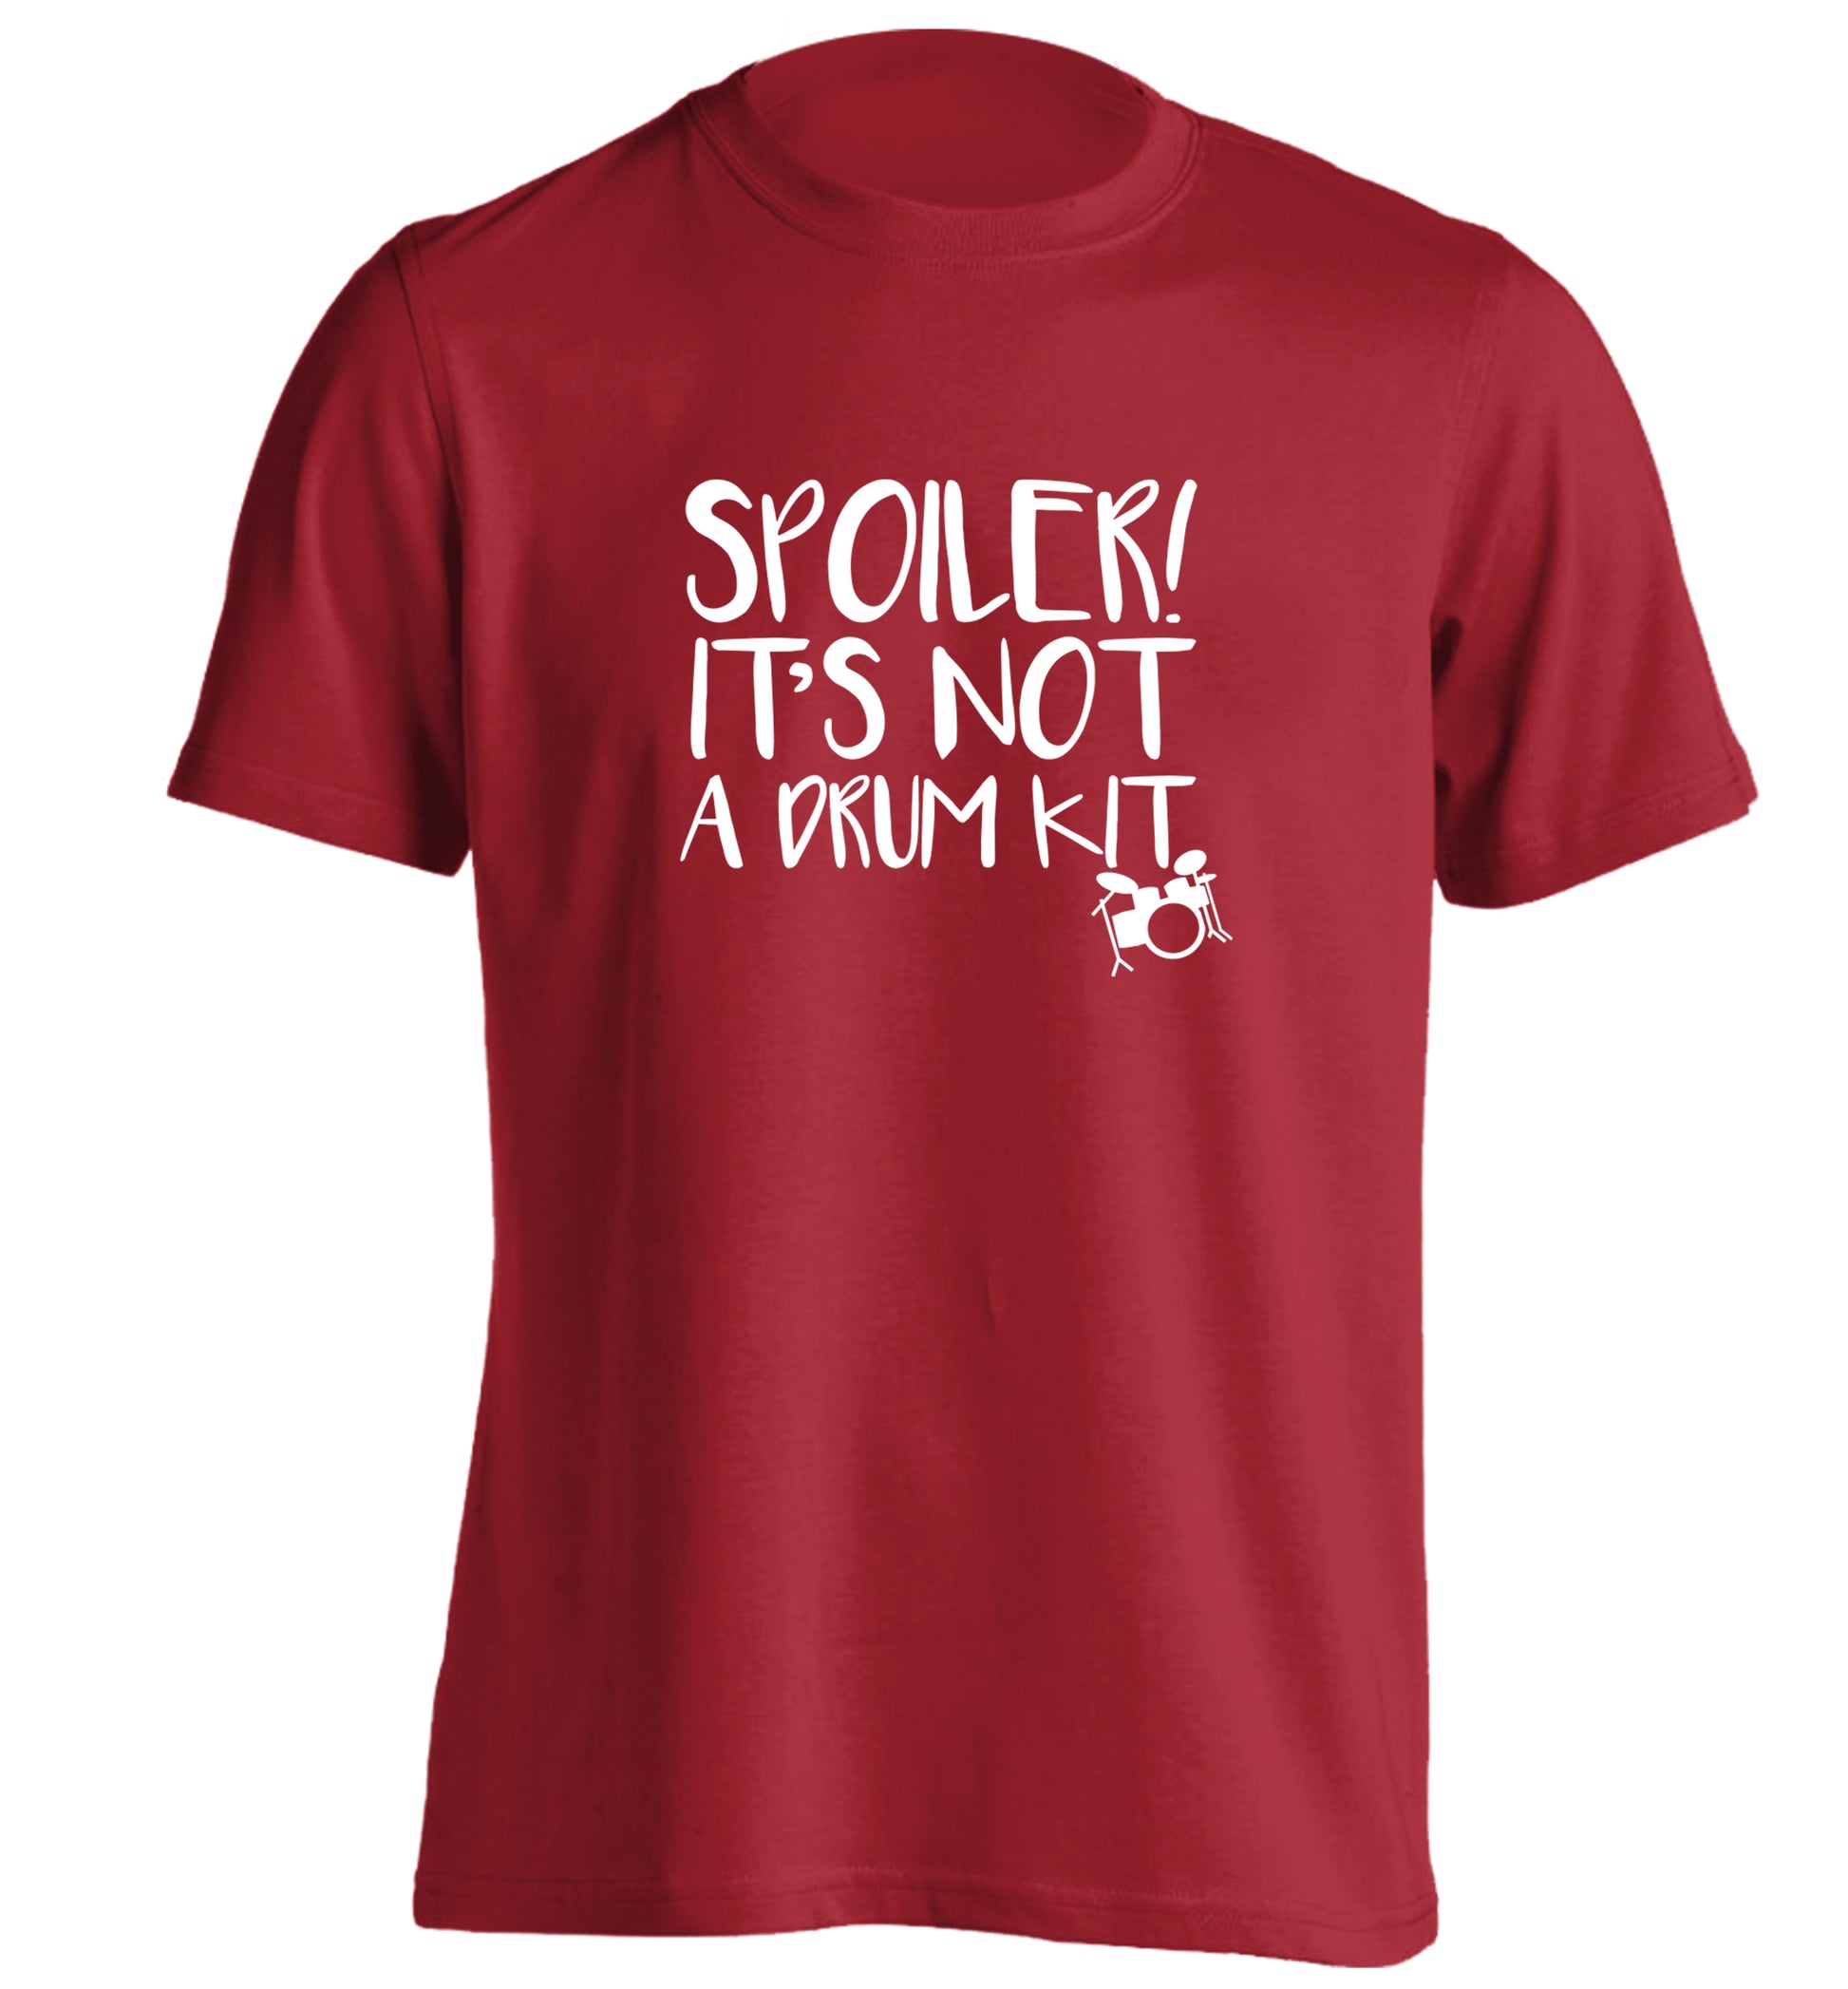 Spoiler it's not a drum kit adults unisex red Tshirt 2XL